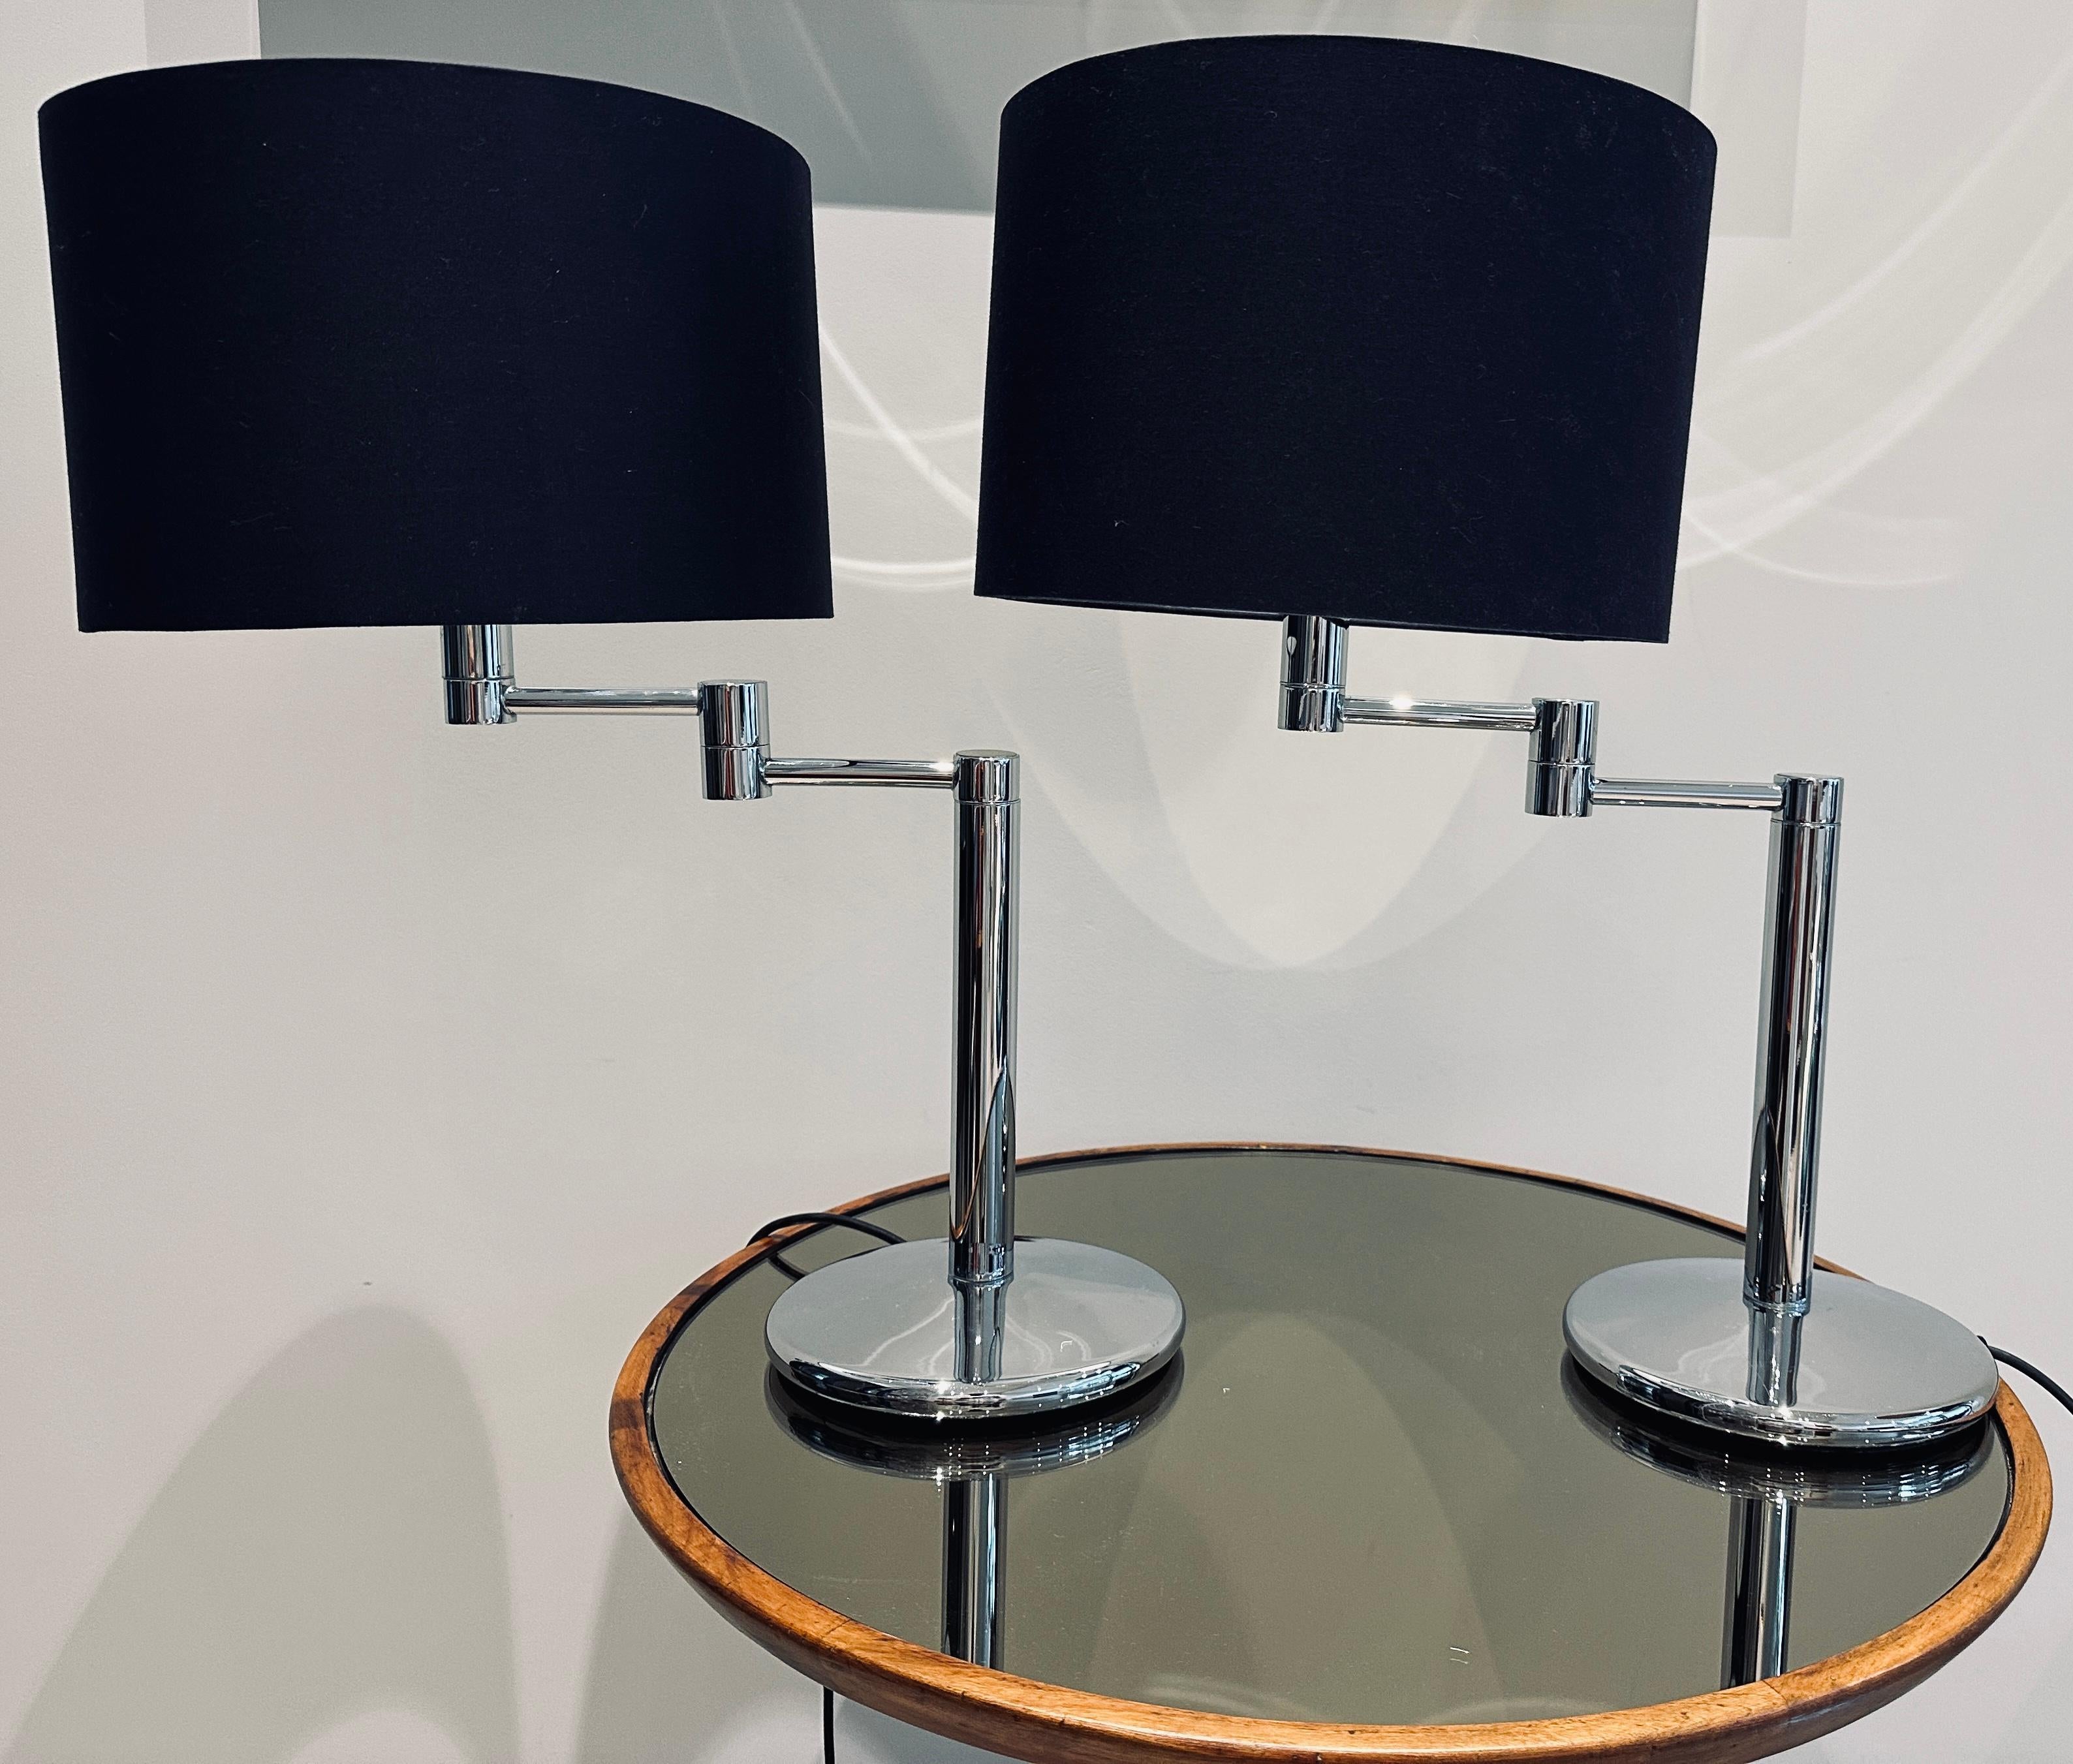 Pair of 1970s American Walter Von Nessen Style Swing Arm Chrome Table Lamps In Good Condition For Sale In London, GB